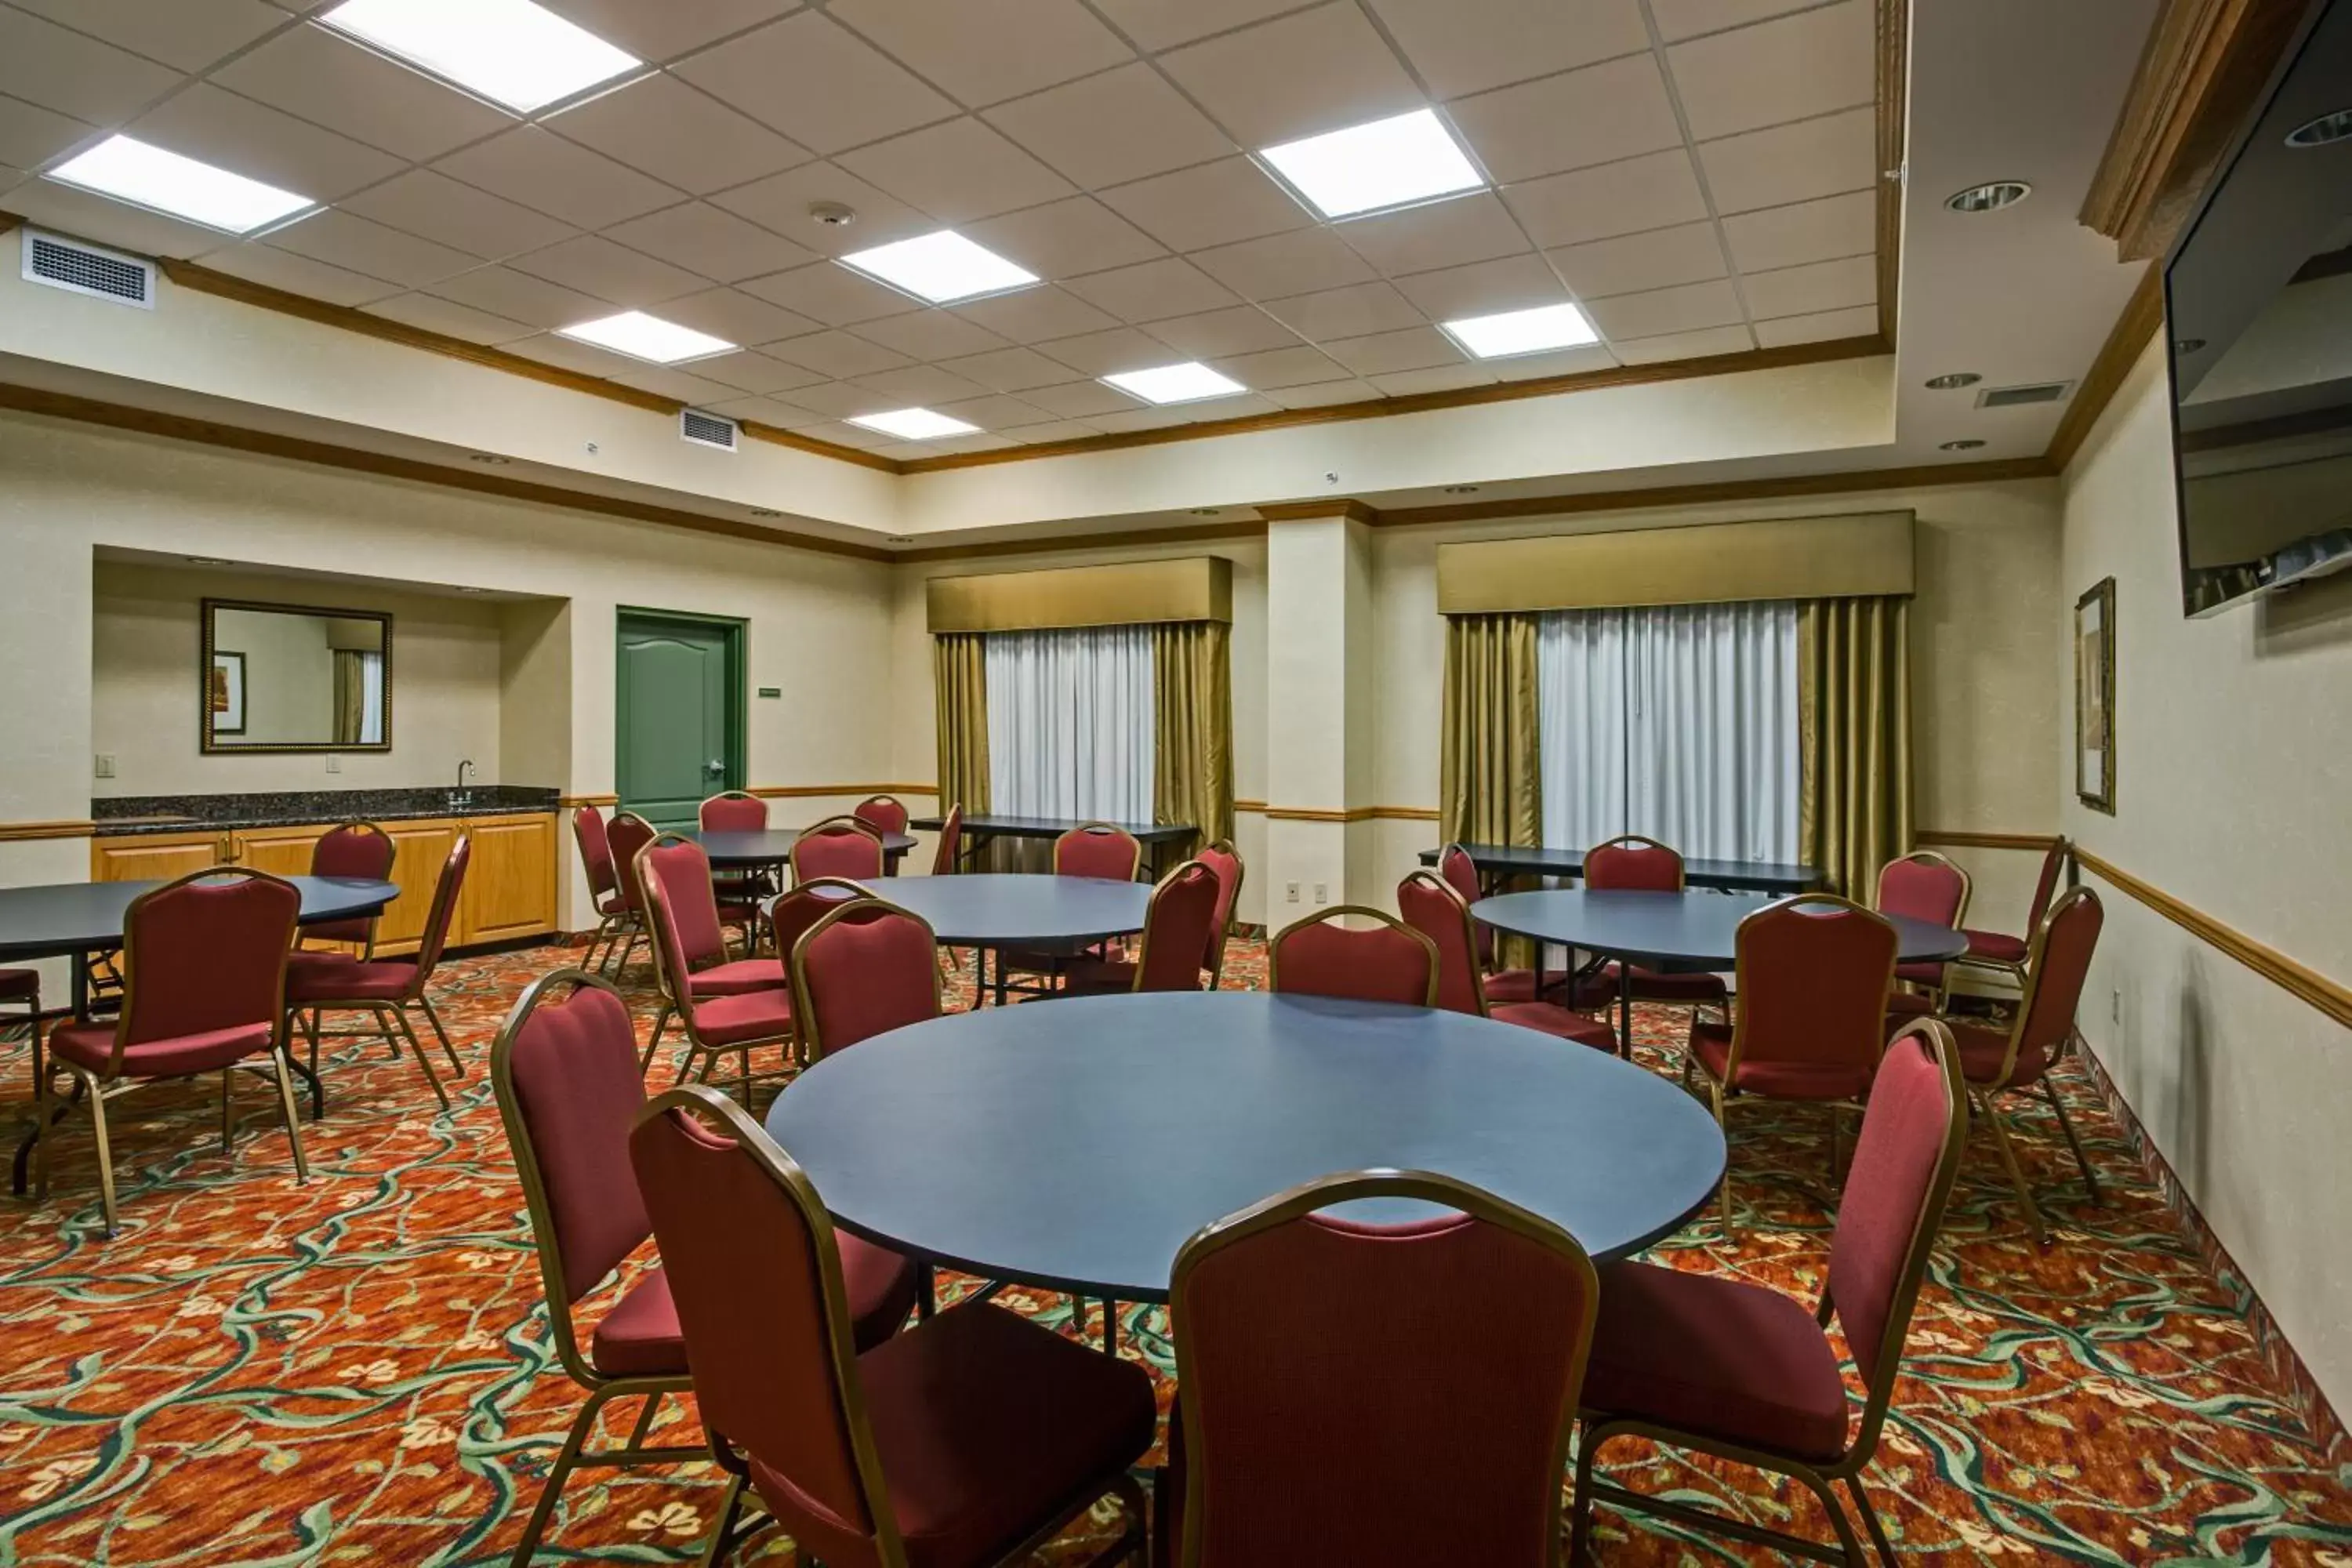 Banquet/Function facilities, Business Area/Conference Room in Country Inn & Suites by Radisson, Pensacola West, FL